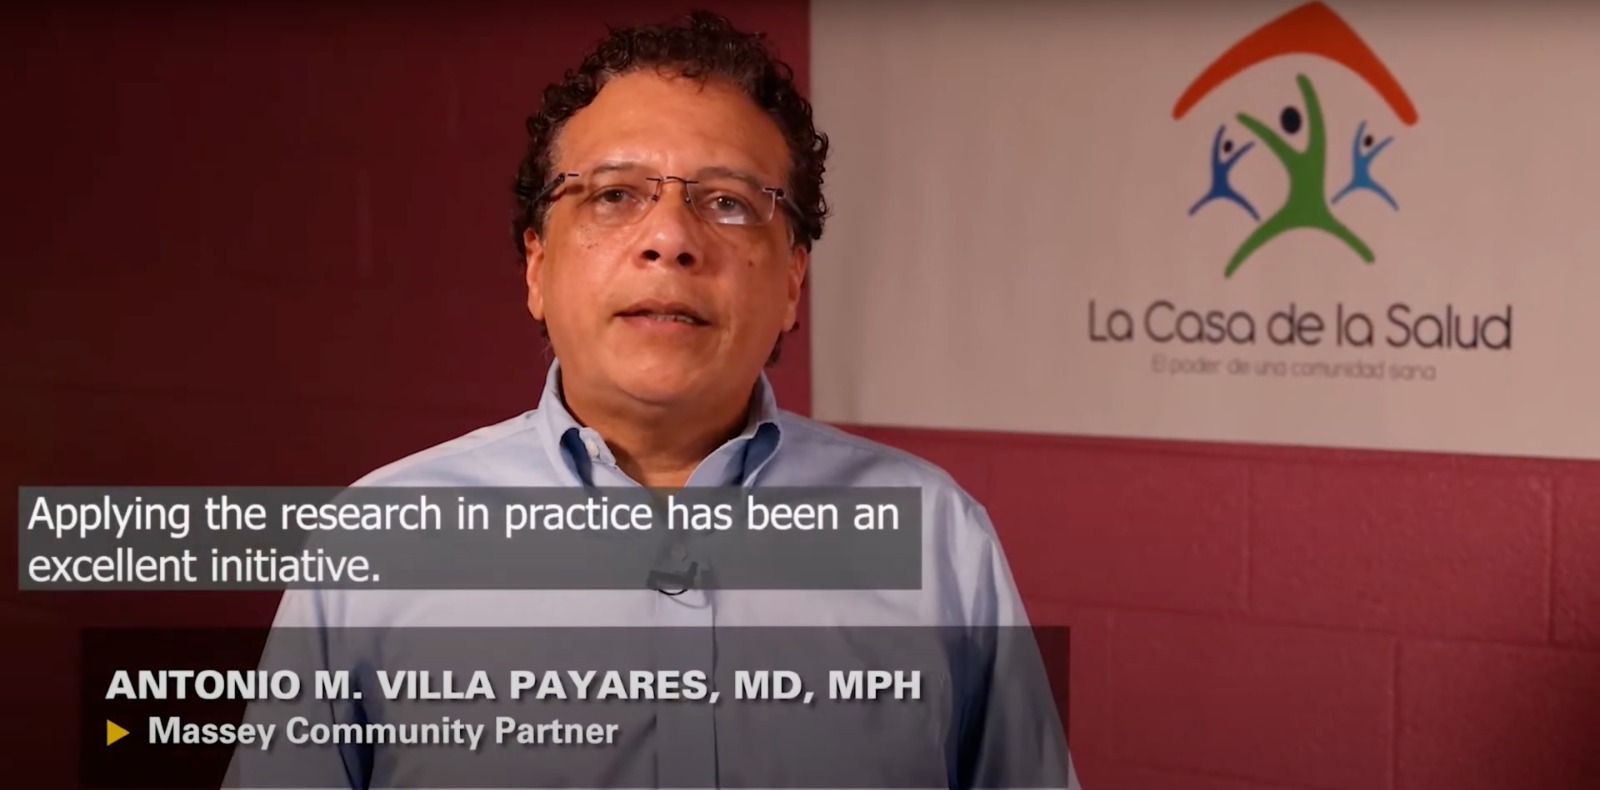 Collaborating for Change: LCS Partners with Pioneering Cancer Center to Empower Communities in Research and Care